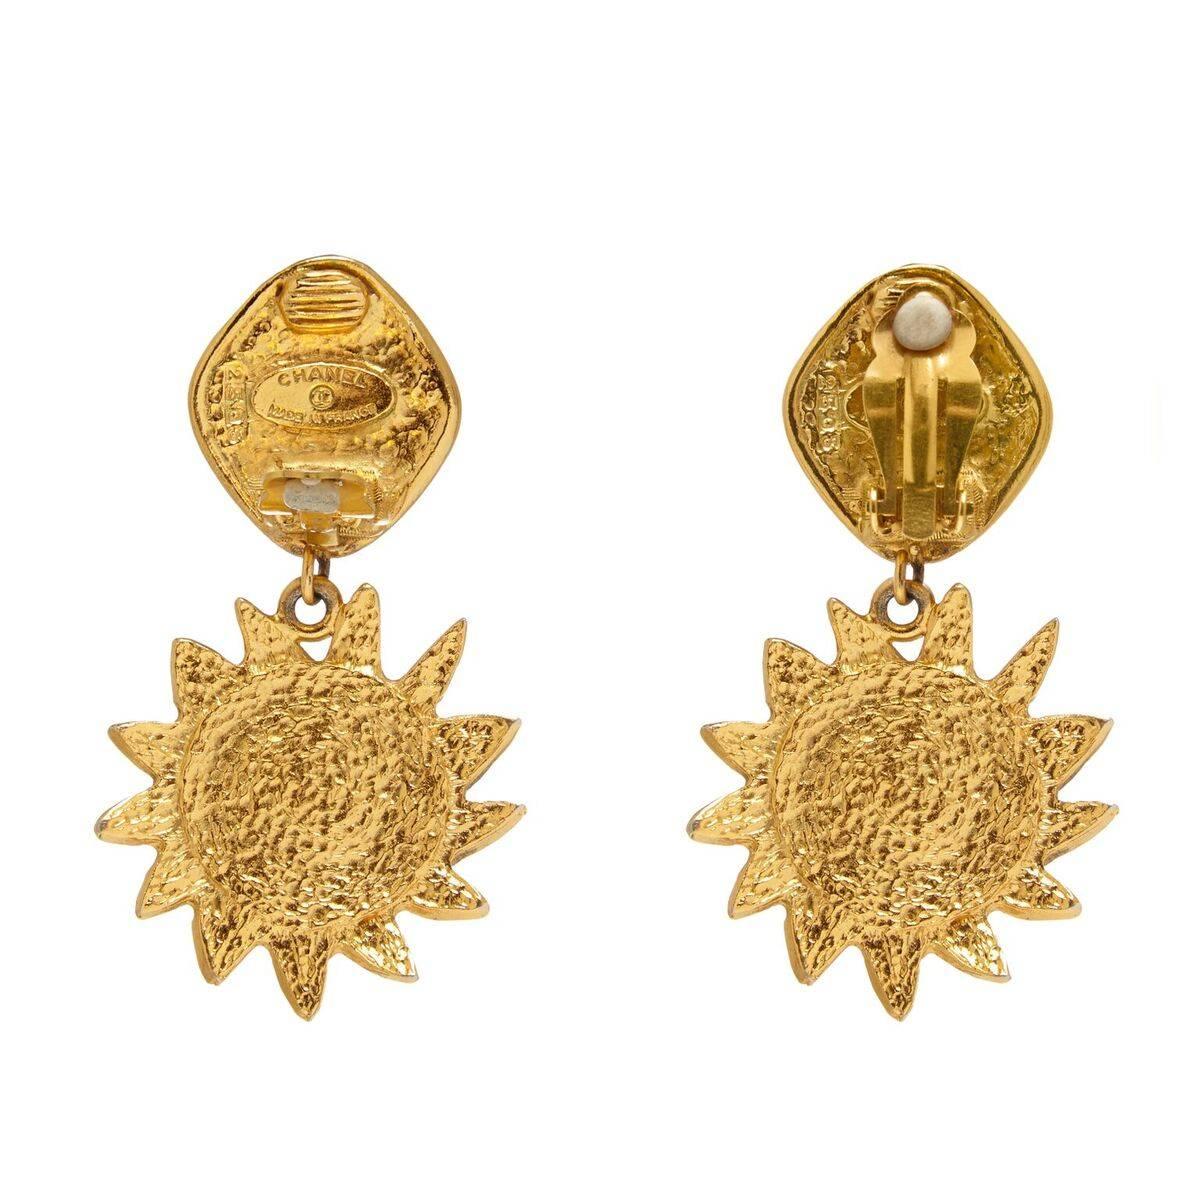 Charming Chanel 1990s gold tone sun drop earrings with pearl inset and abstract flower motif clip fastening. The designers signature is located on the reverse of each piece below the clip. In superb vintage condition. 

Length - 2.2